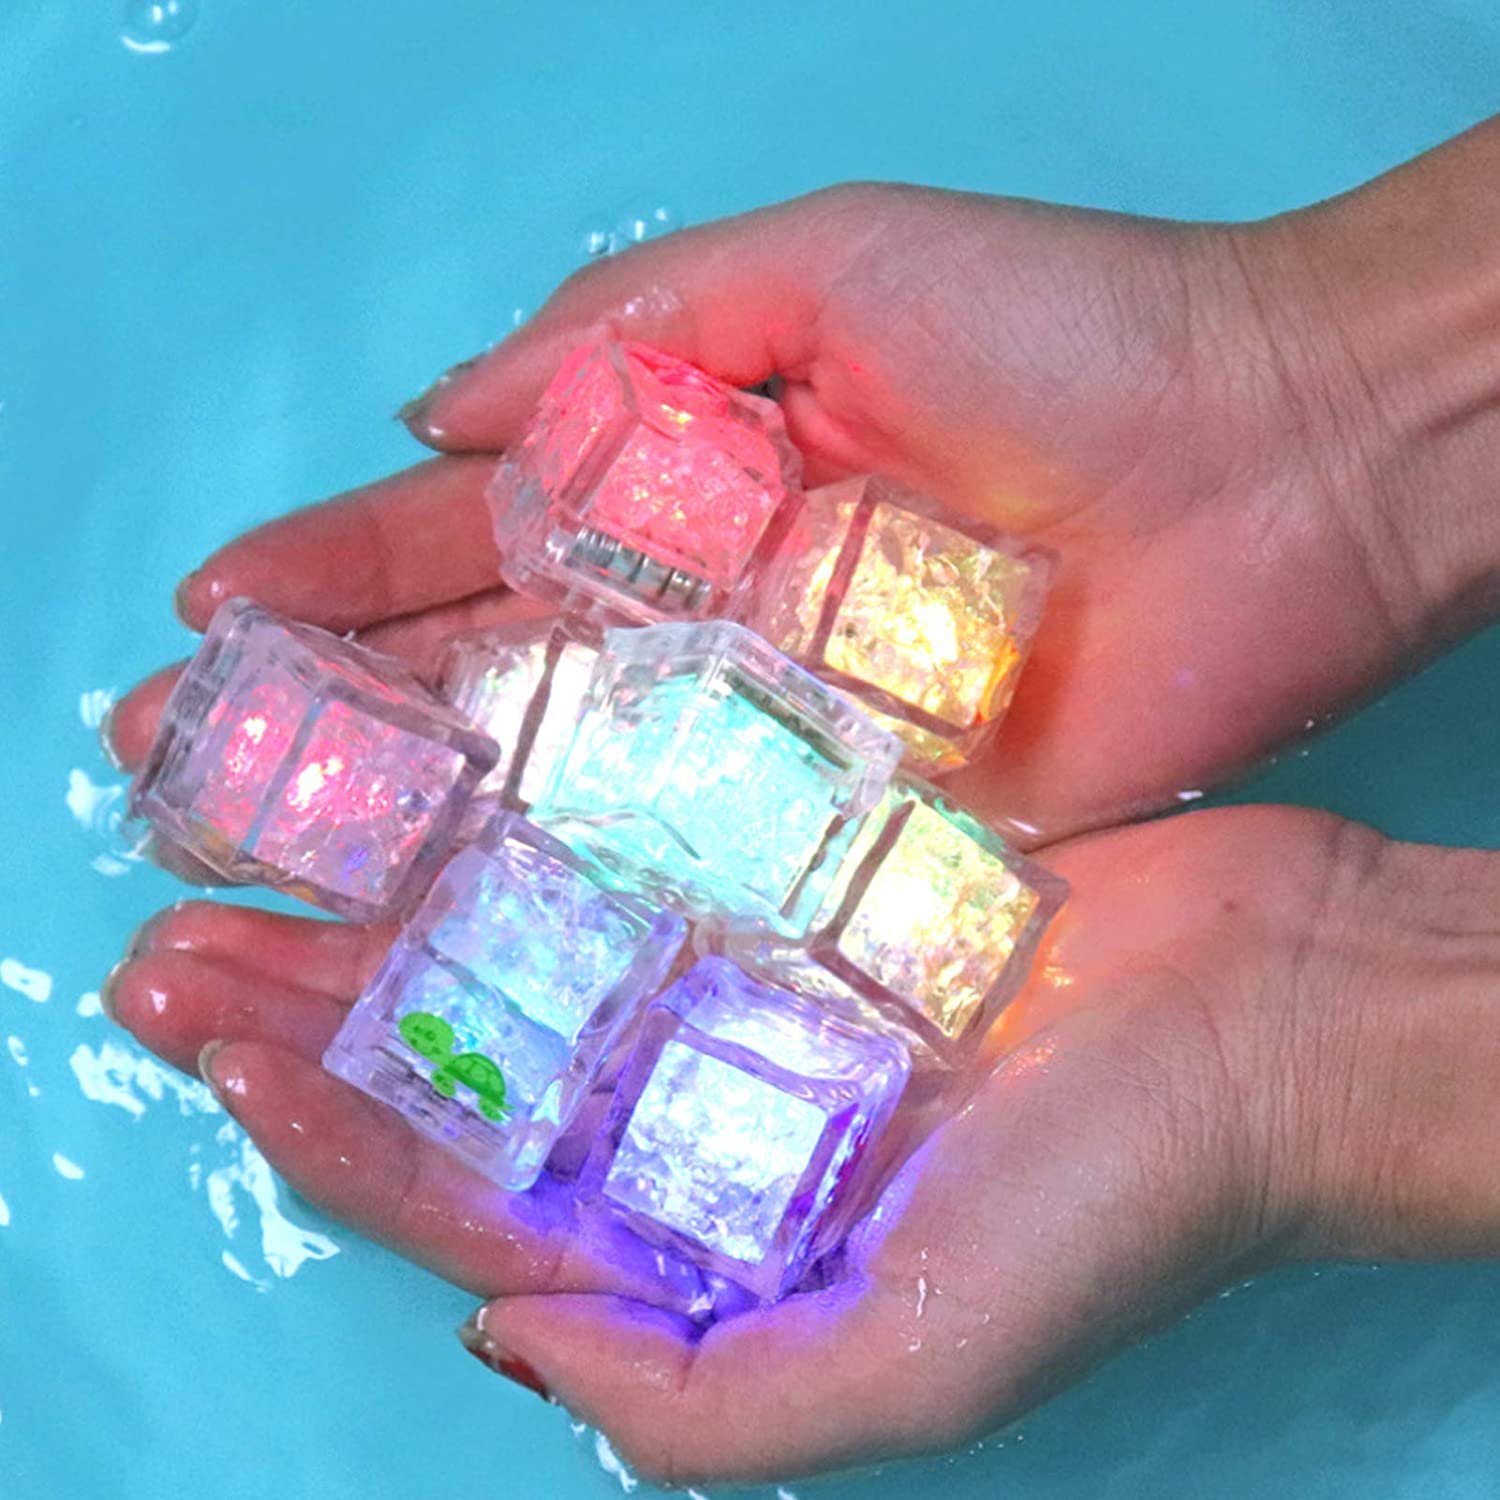 🎄CHRISTMAS SALE 50% OFF🎄 LED Ice Cube Bath Toy - BUY 4 PACK FREE SHIPPING